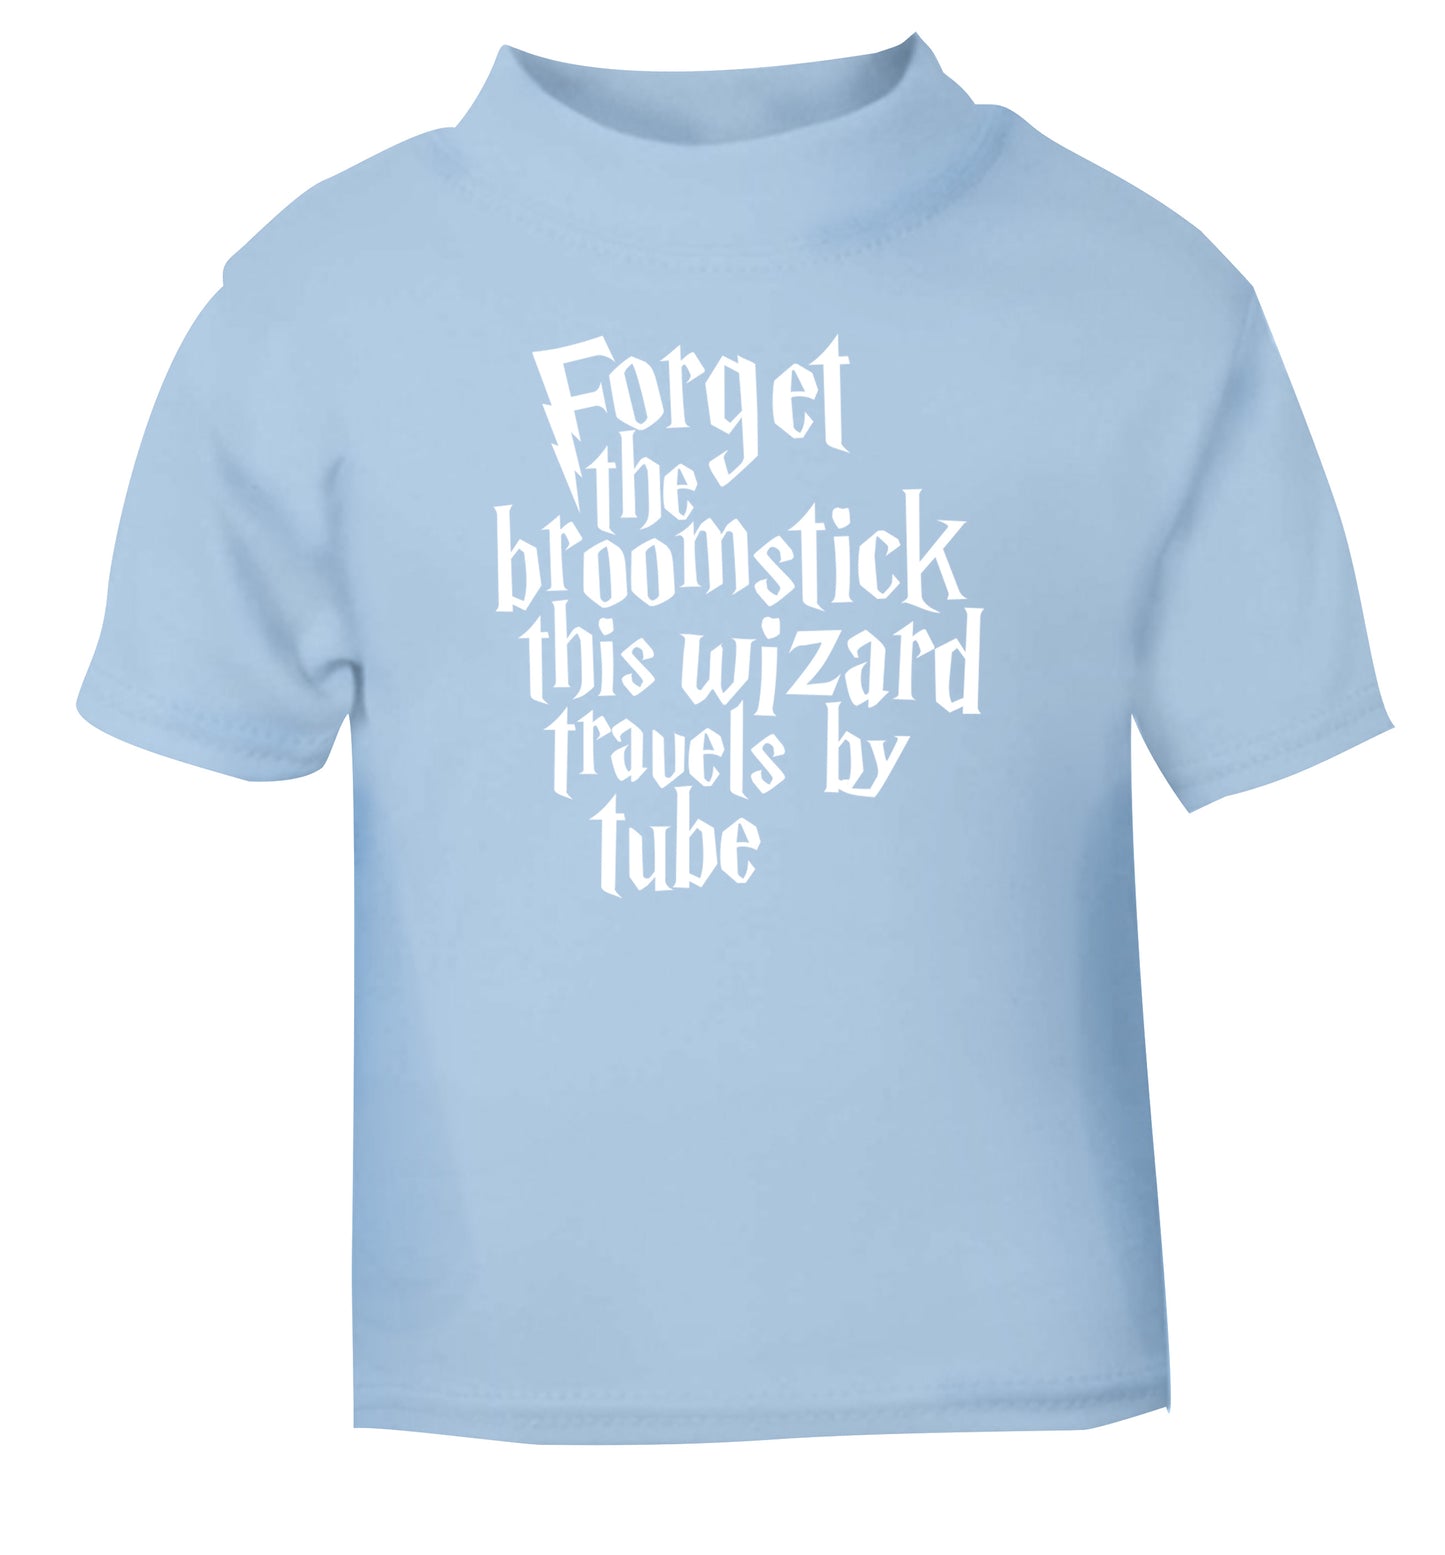 Forget the broomstick this wizard travels by tube light blue Baby Toddler Tshirt 2 Years